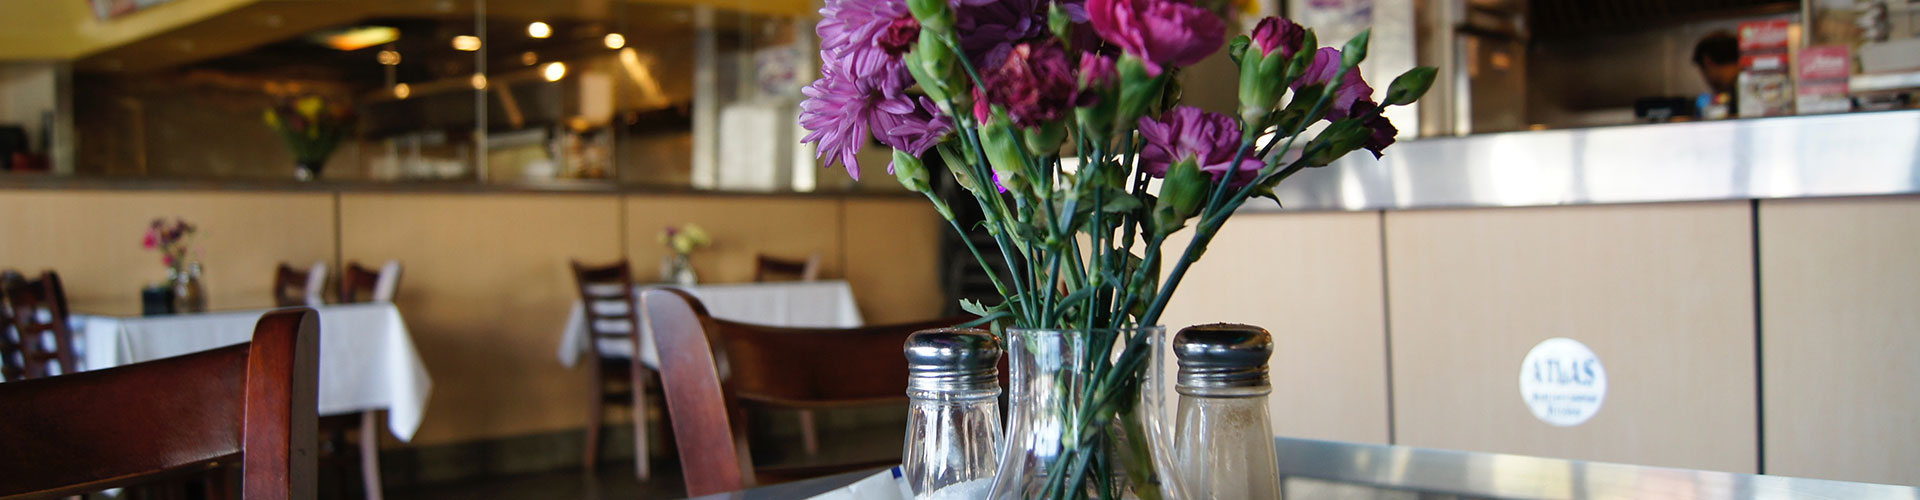 Purple flowers in a vase on a table in a restaurant.